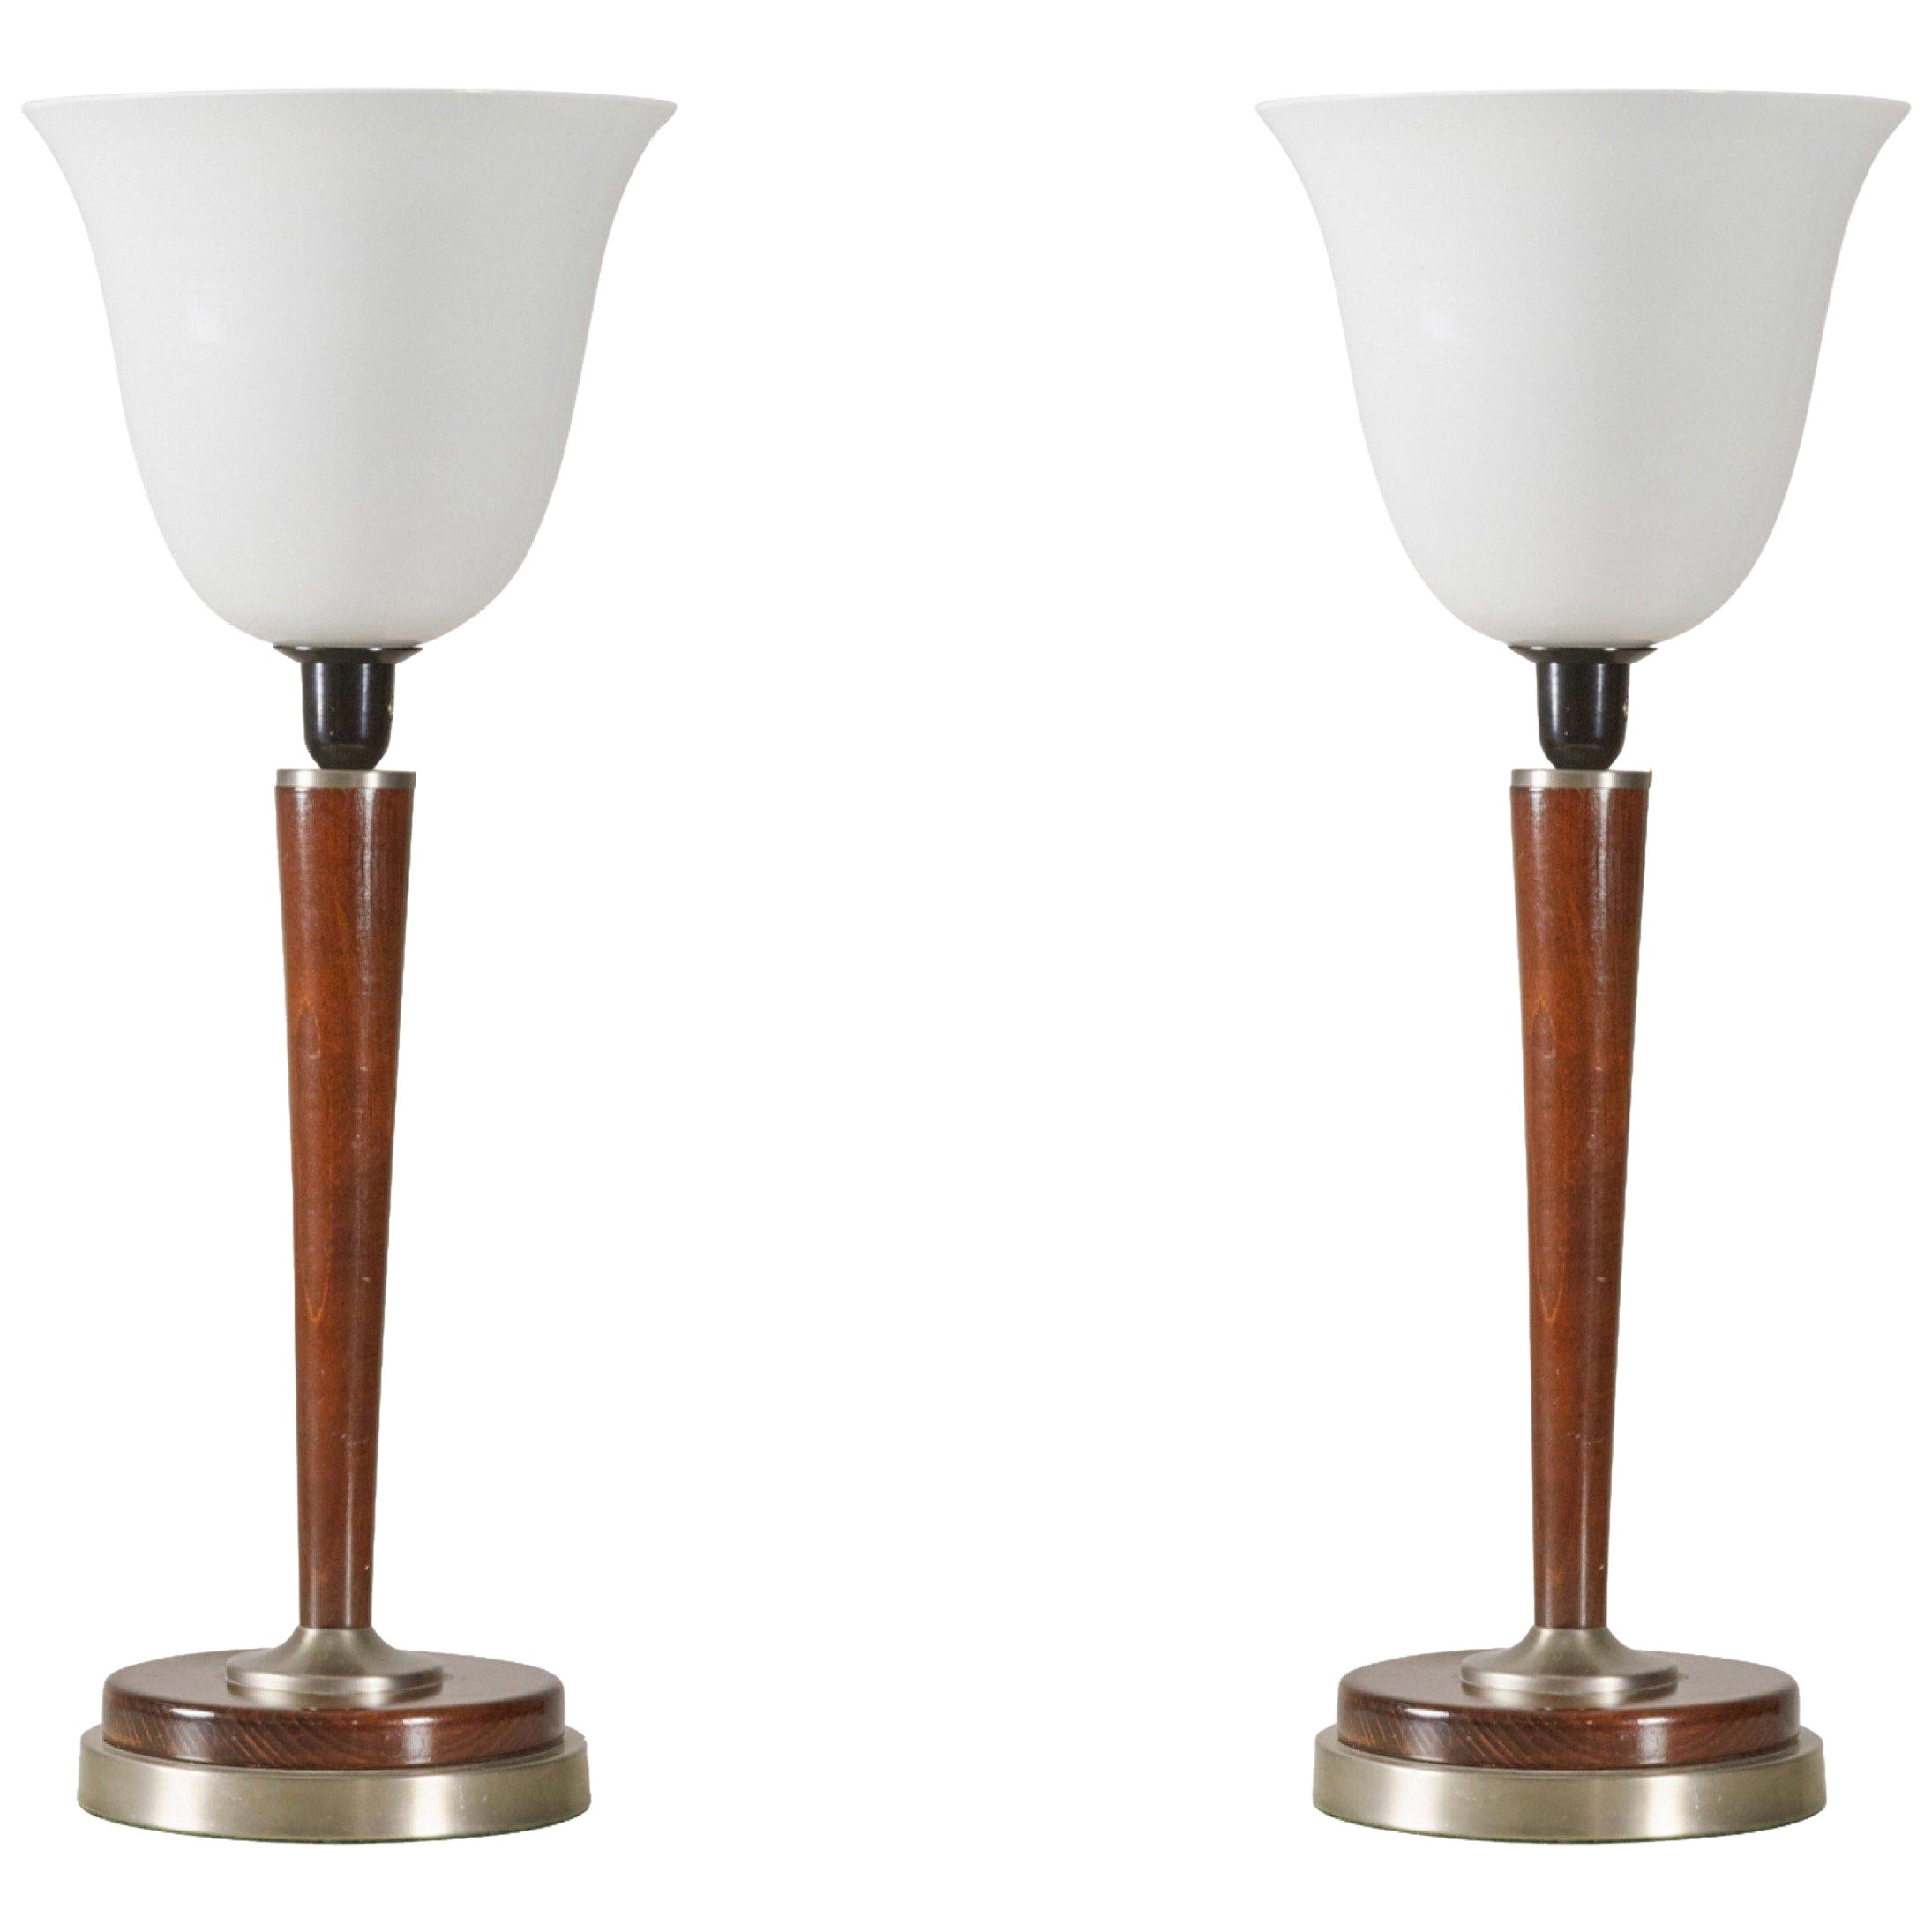 Pair of Art Deco Style Metal and Wood Table Lamps with White Glass Shades